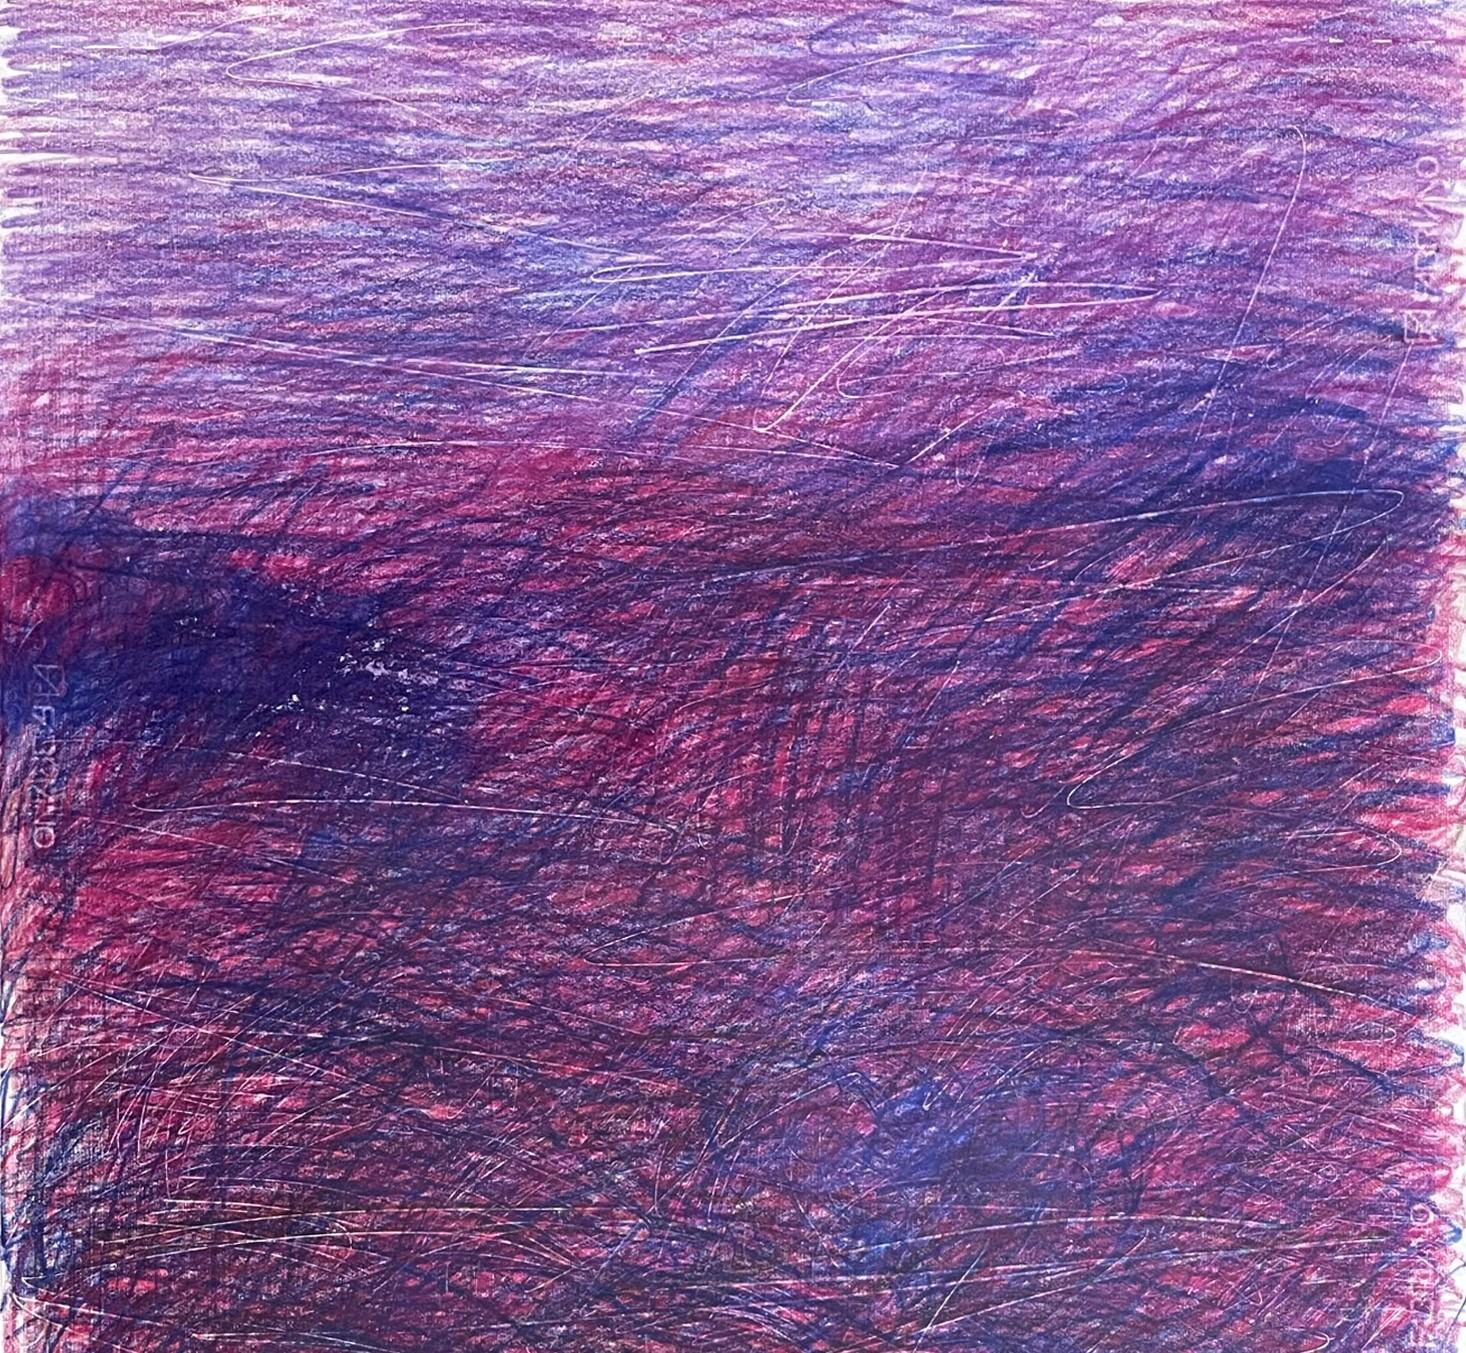 Untitled 05 - Contemporary, Drawing, Purple, 21st Century, Organic - Neo-Expressionist Art by Zsolt Berszán